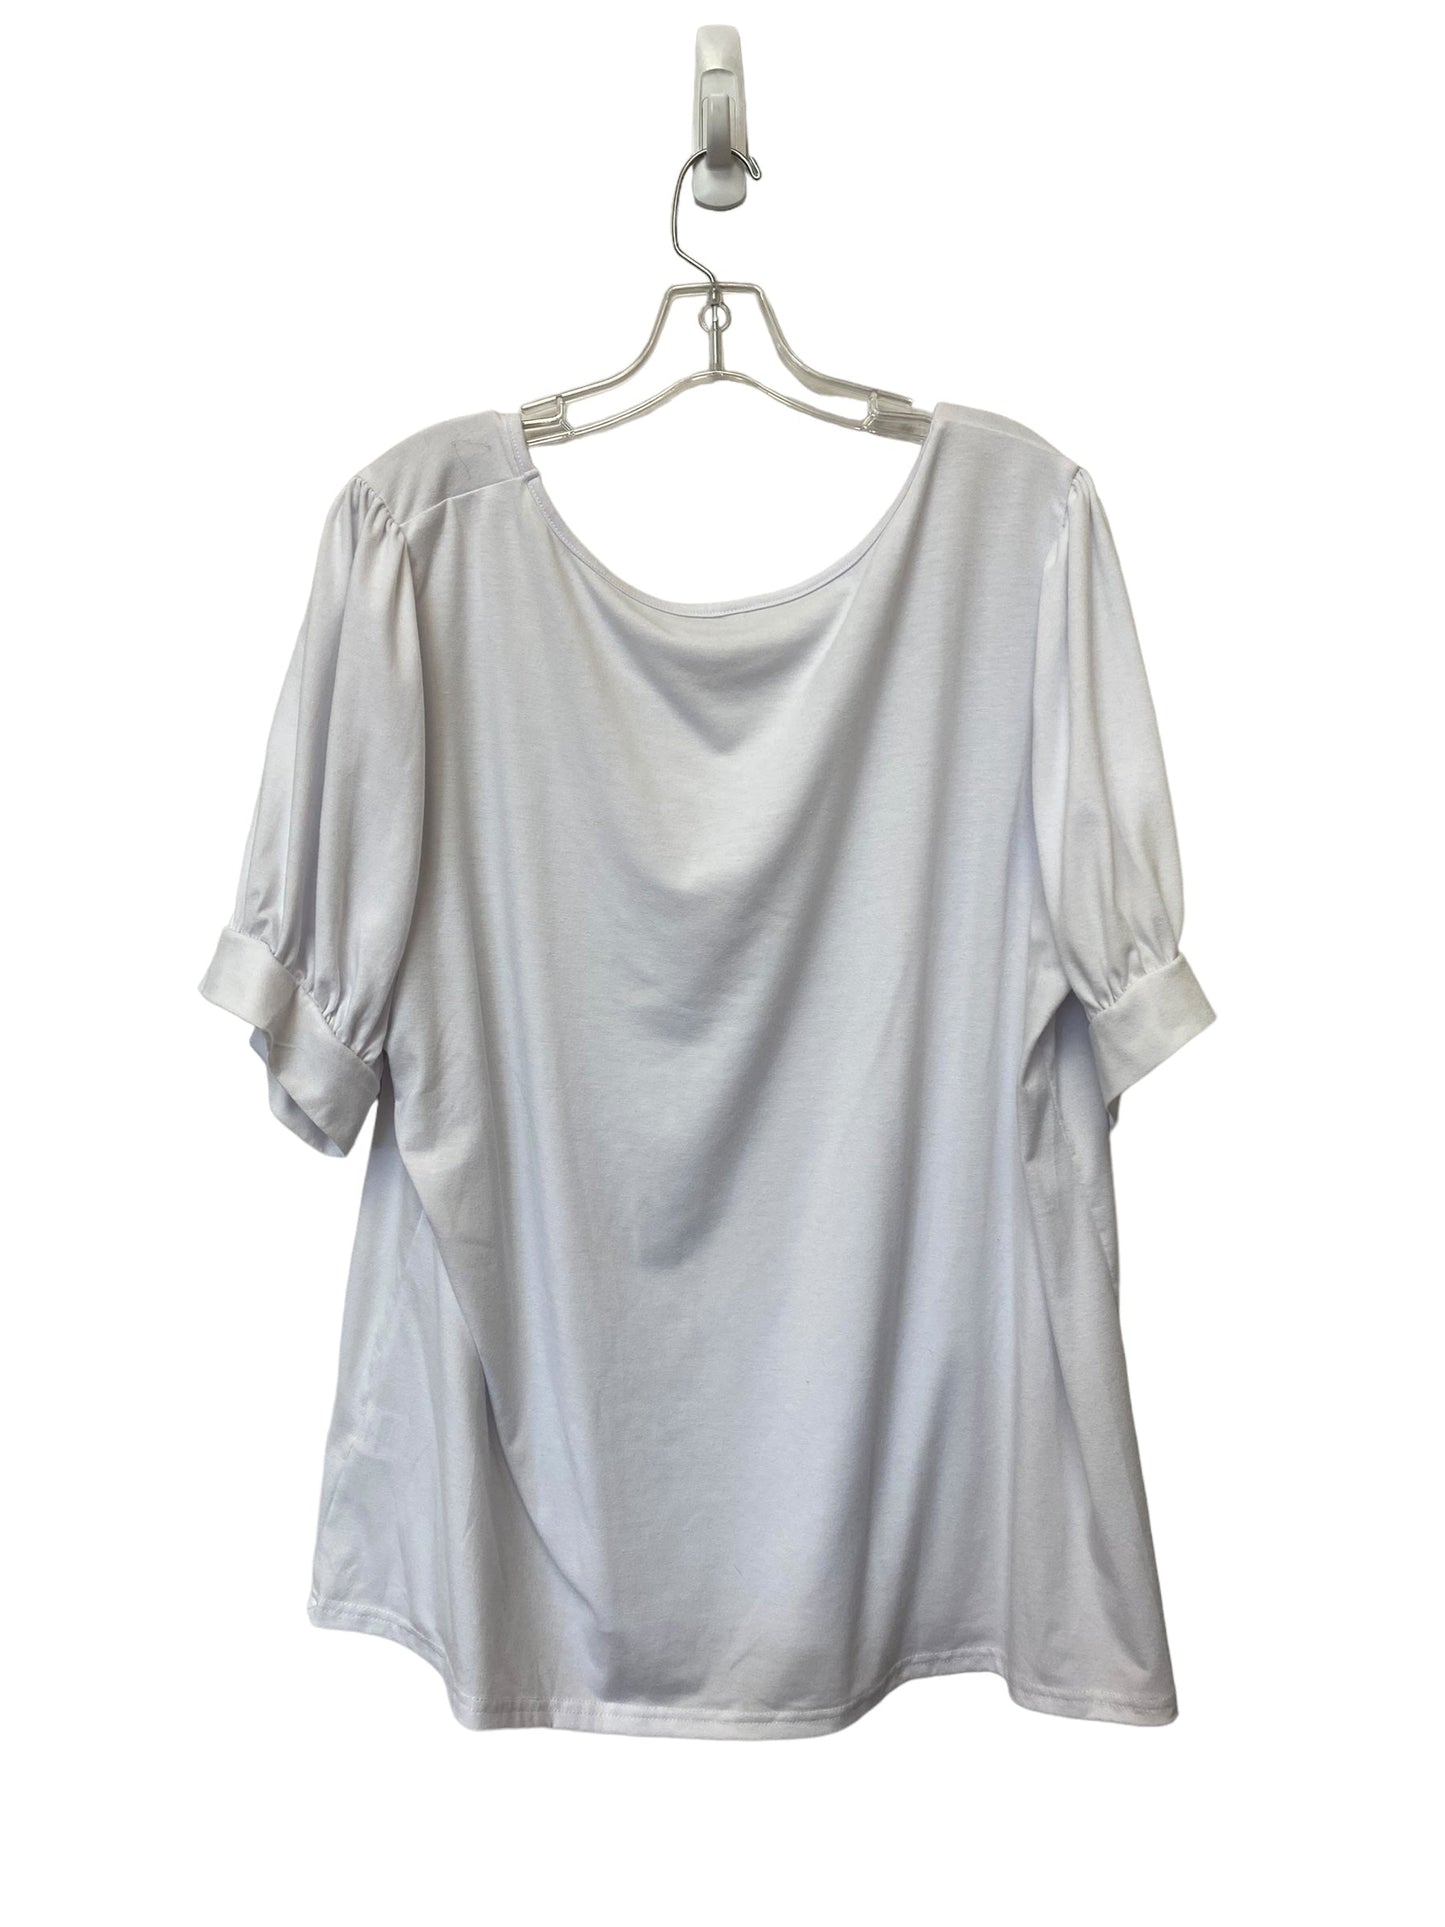 White Top Short Sleeve Basic Clothes Mentor, Size 3x